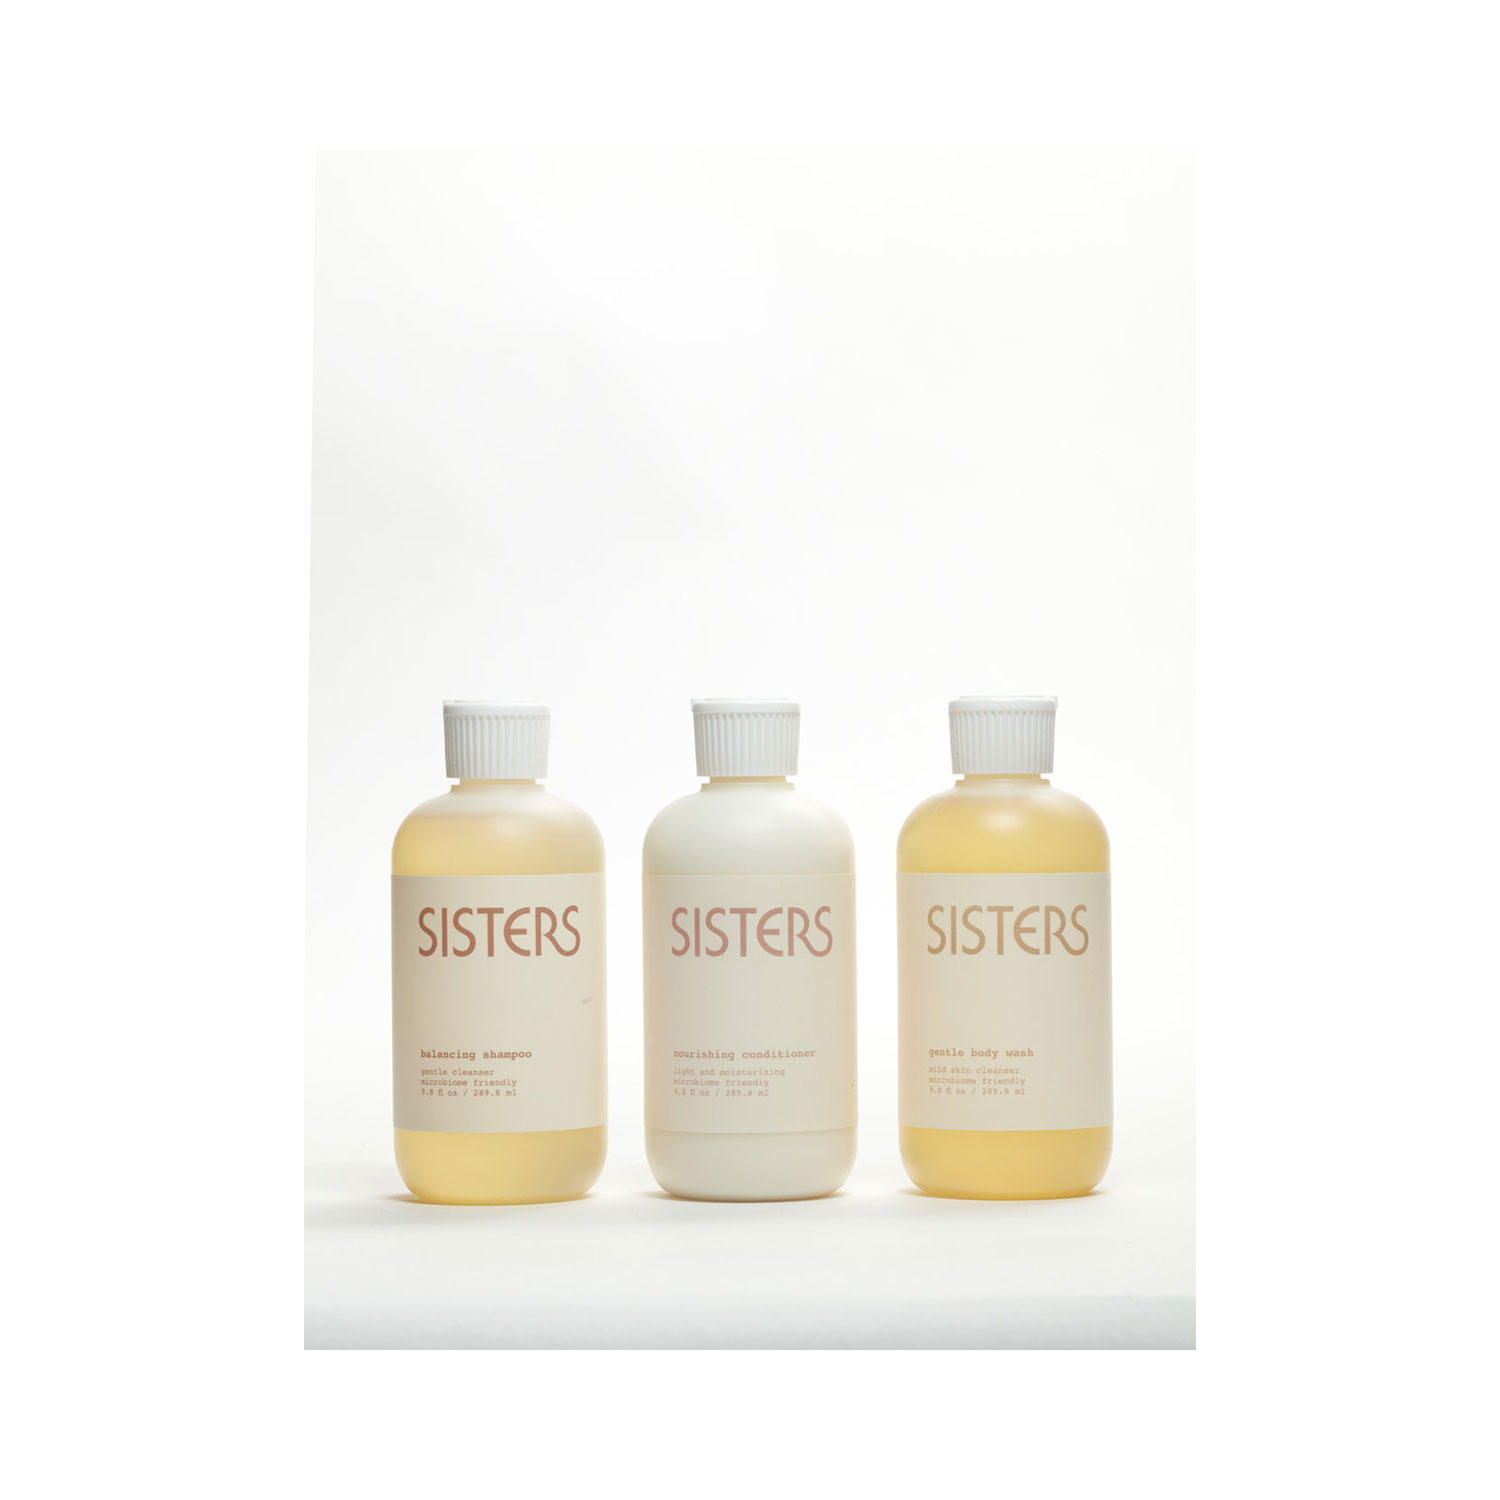 SISTERS HAIR AND BODY CARE